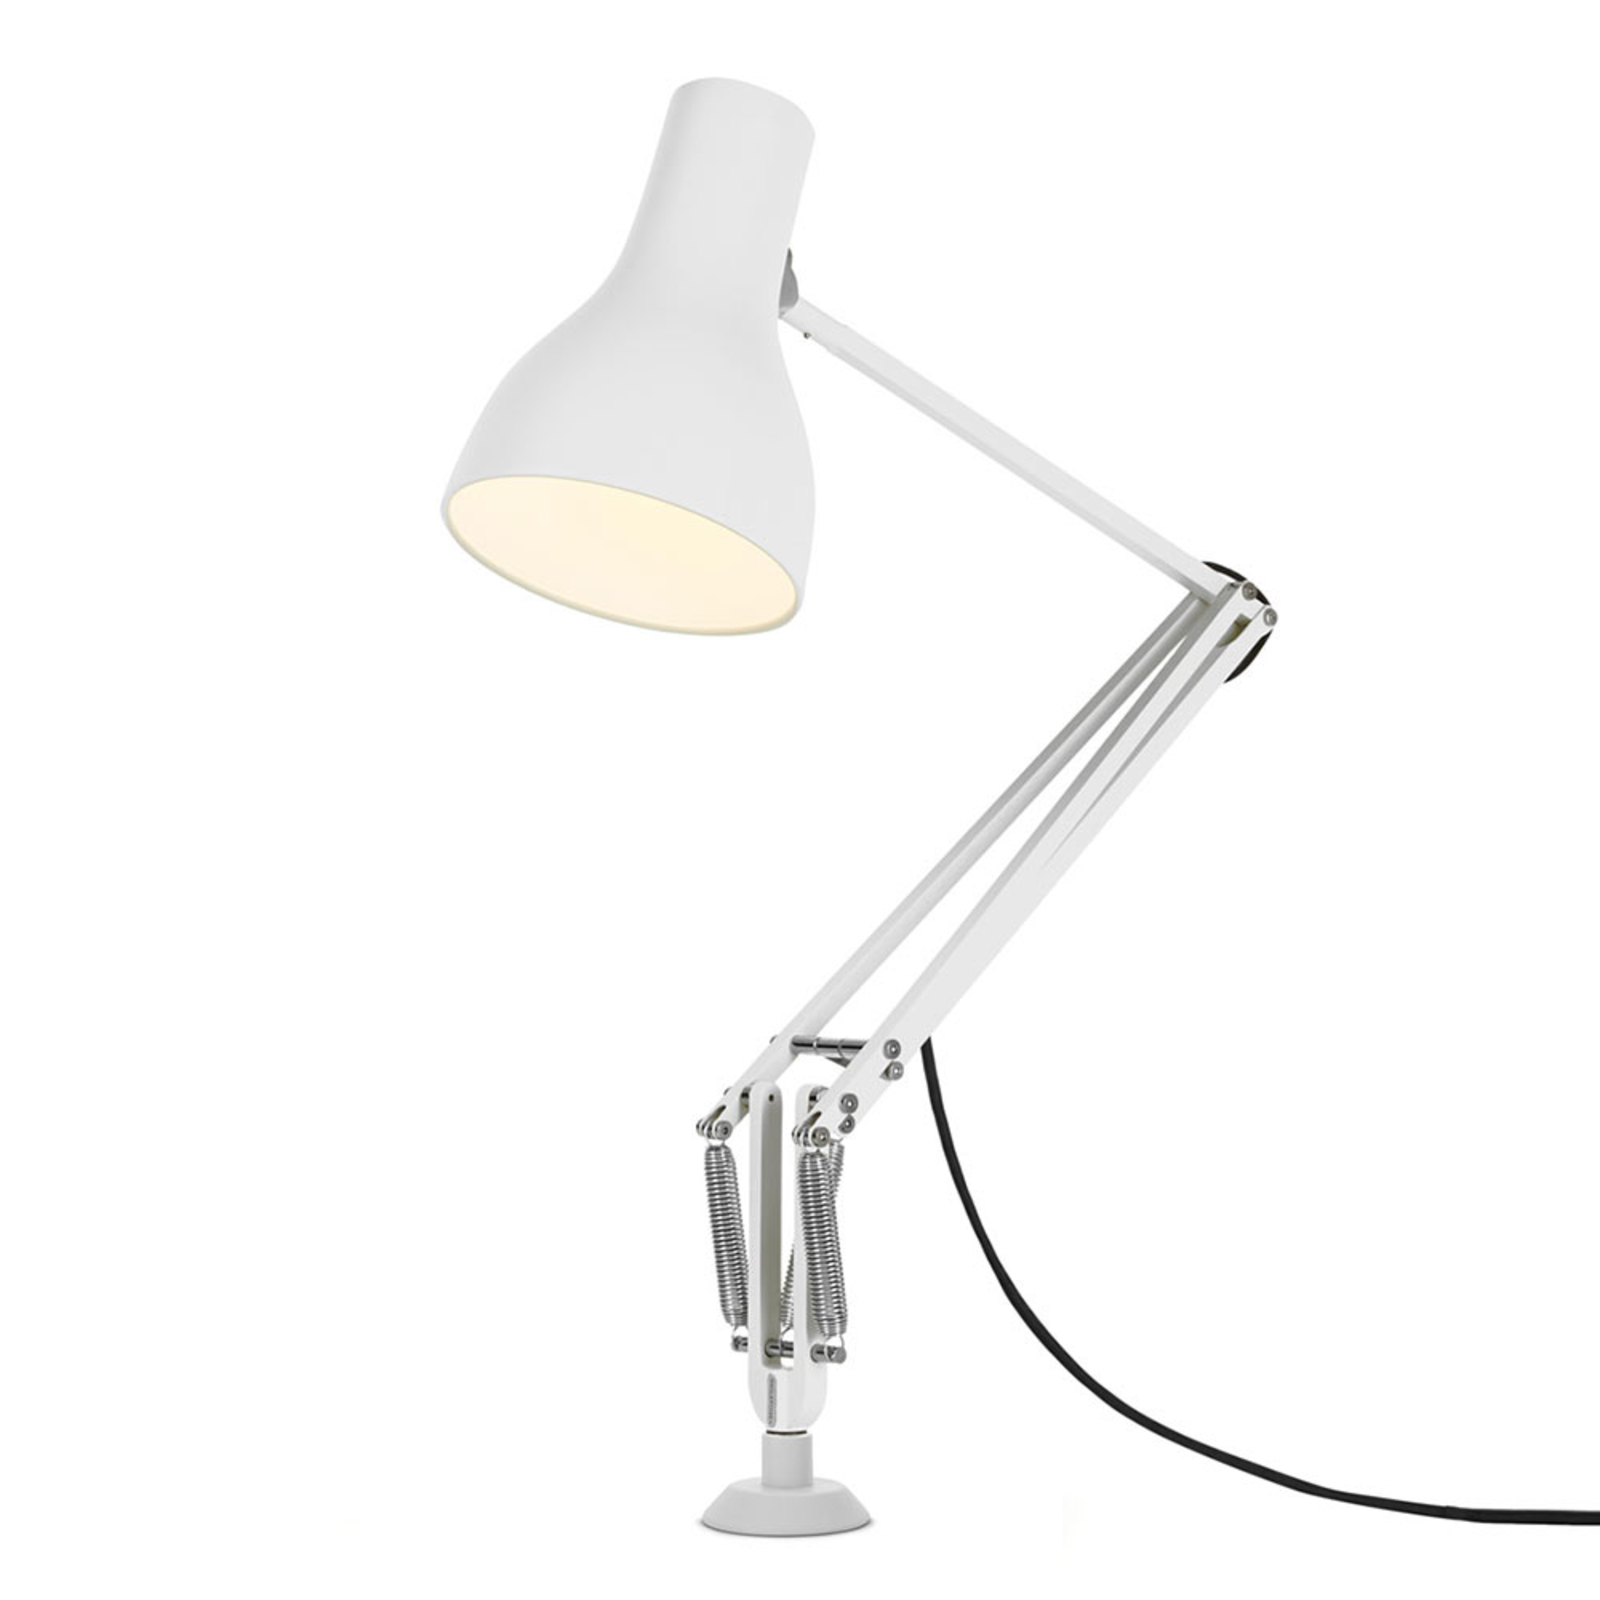 Anglepoise Type 75 table lamp screw base white